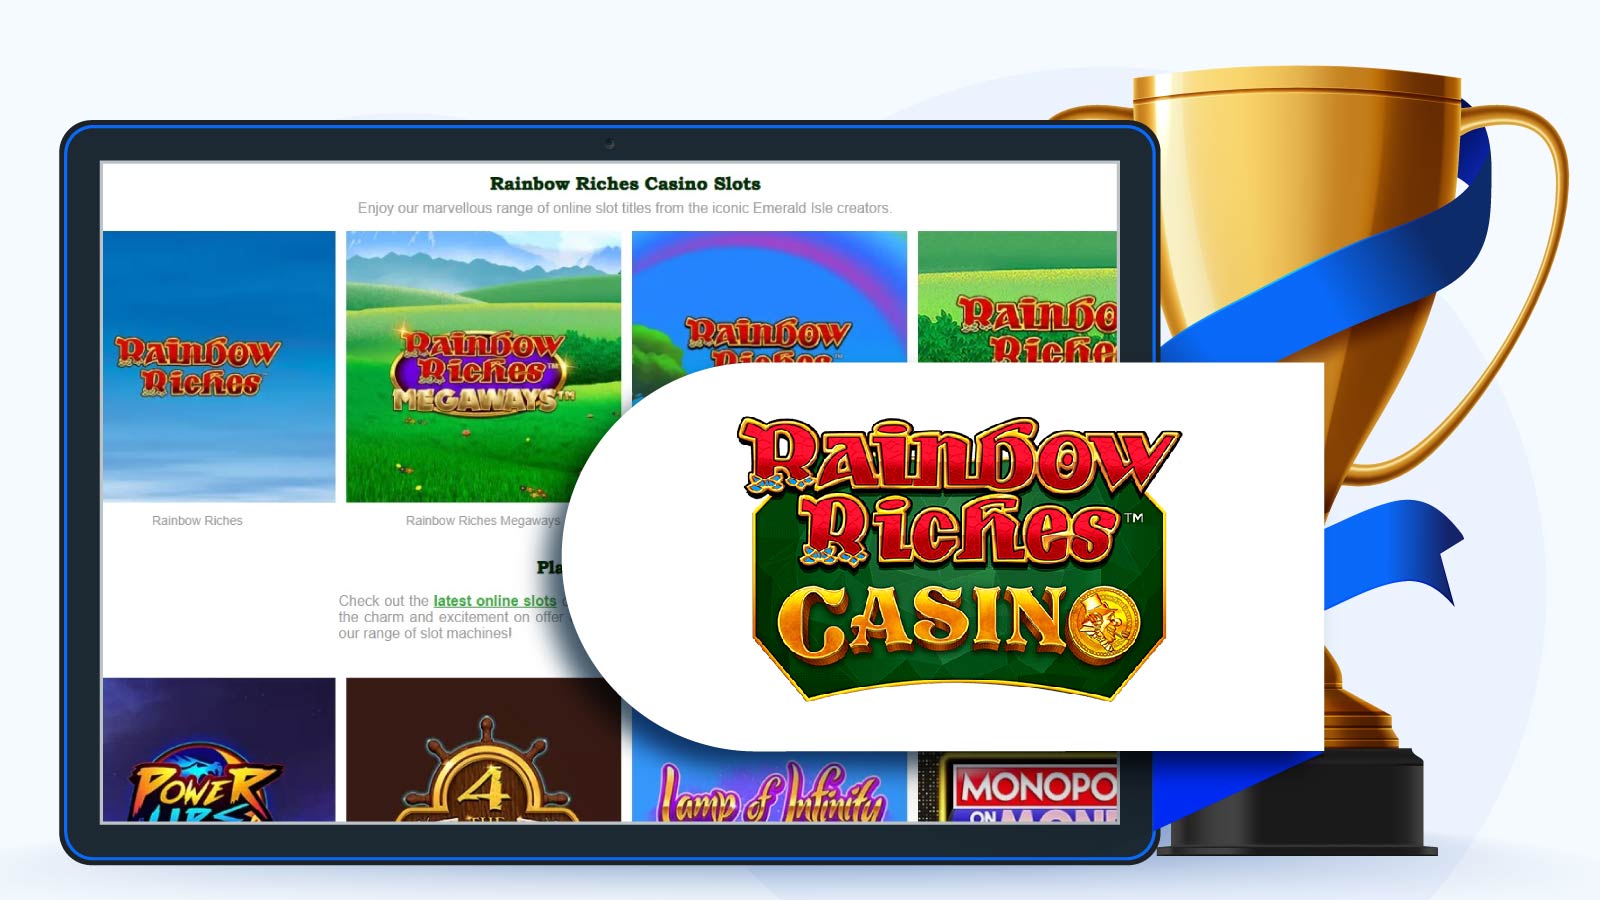 Rainbow Riches Casino The Best No Wagering Casino in UK